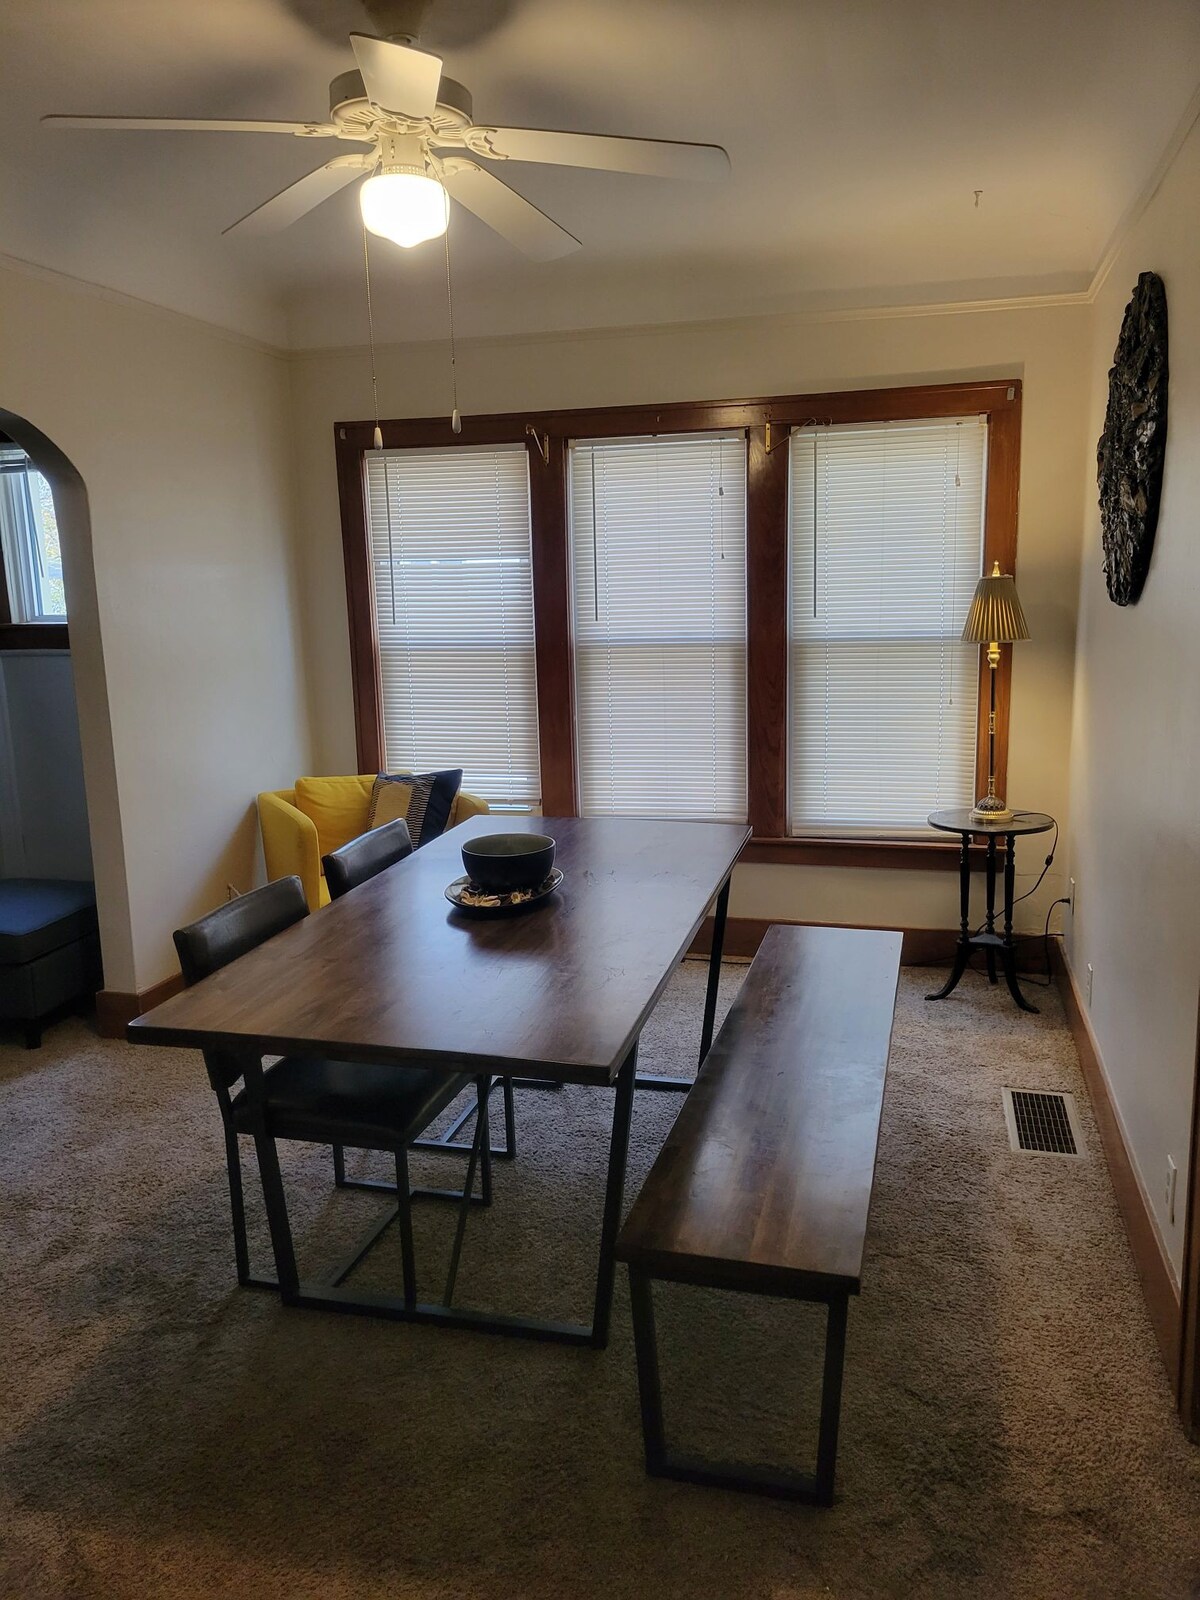 2 Bedroom private apartment near downtown Dearborn